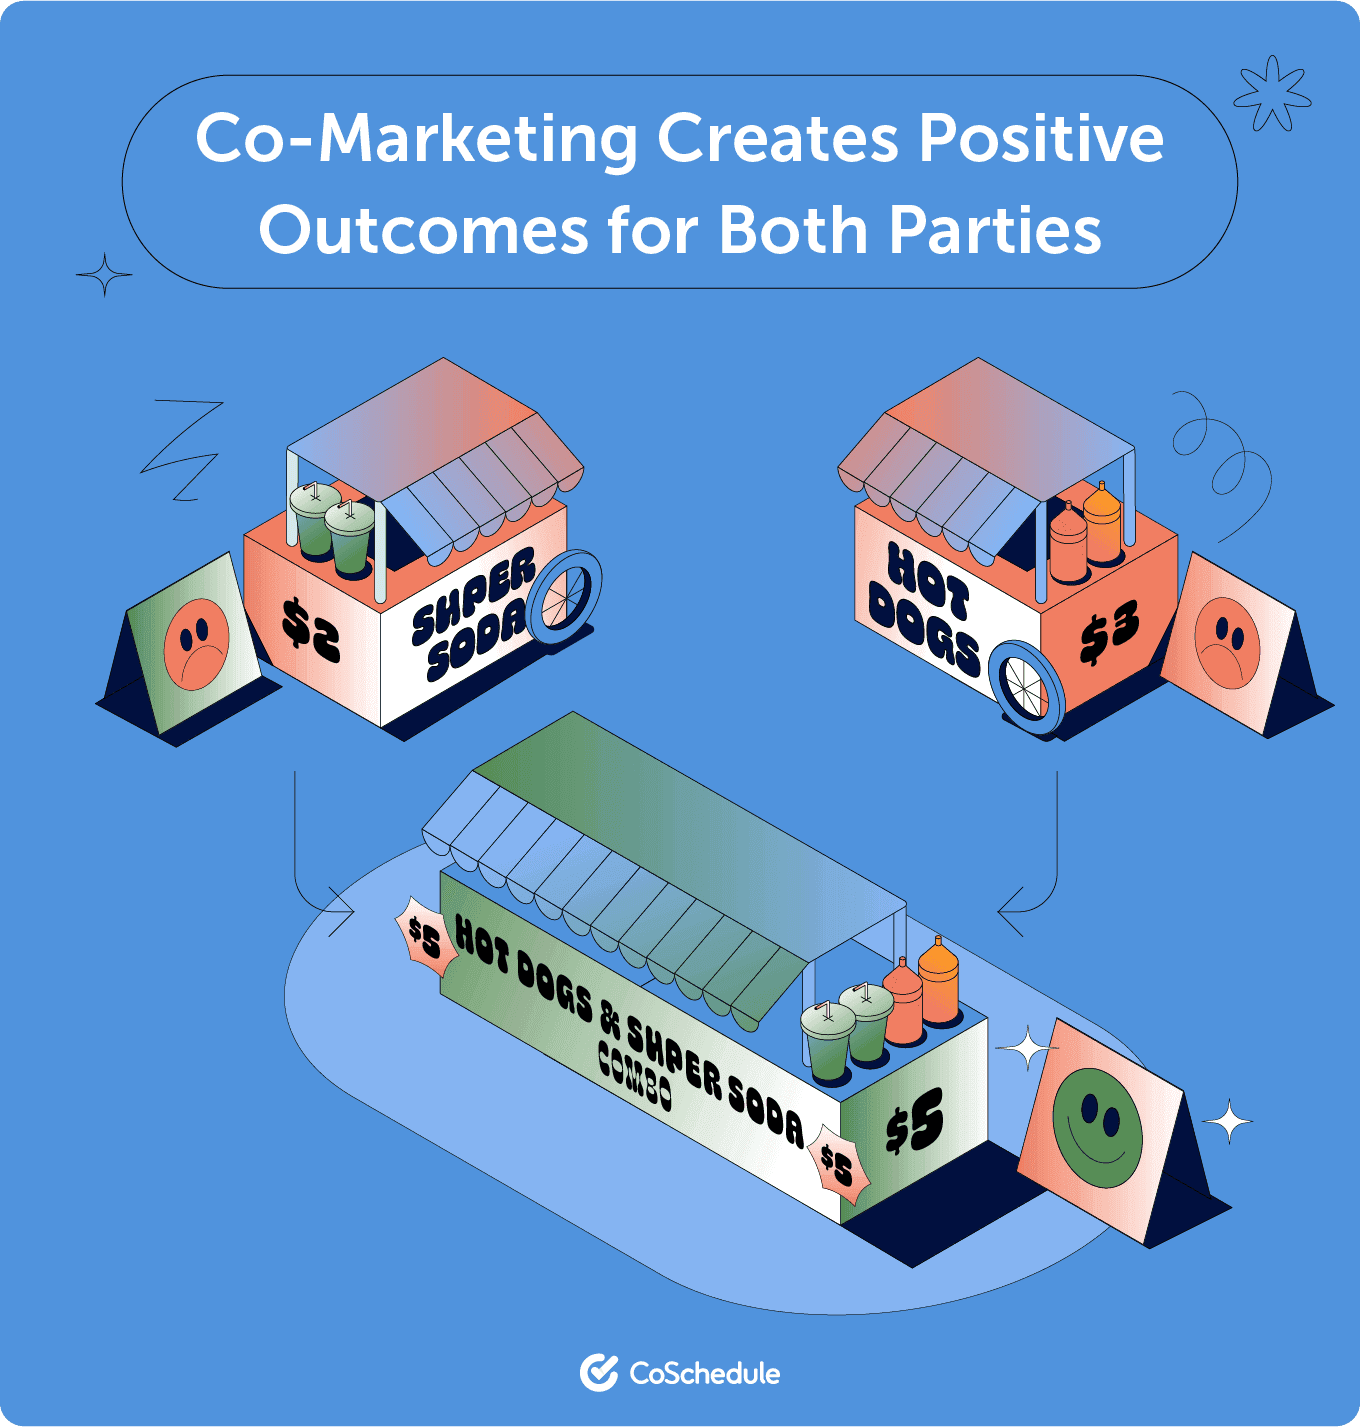 Co-Marketing can create positive outcomes for both parties